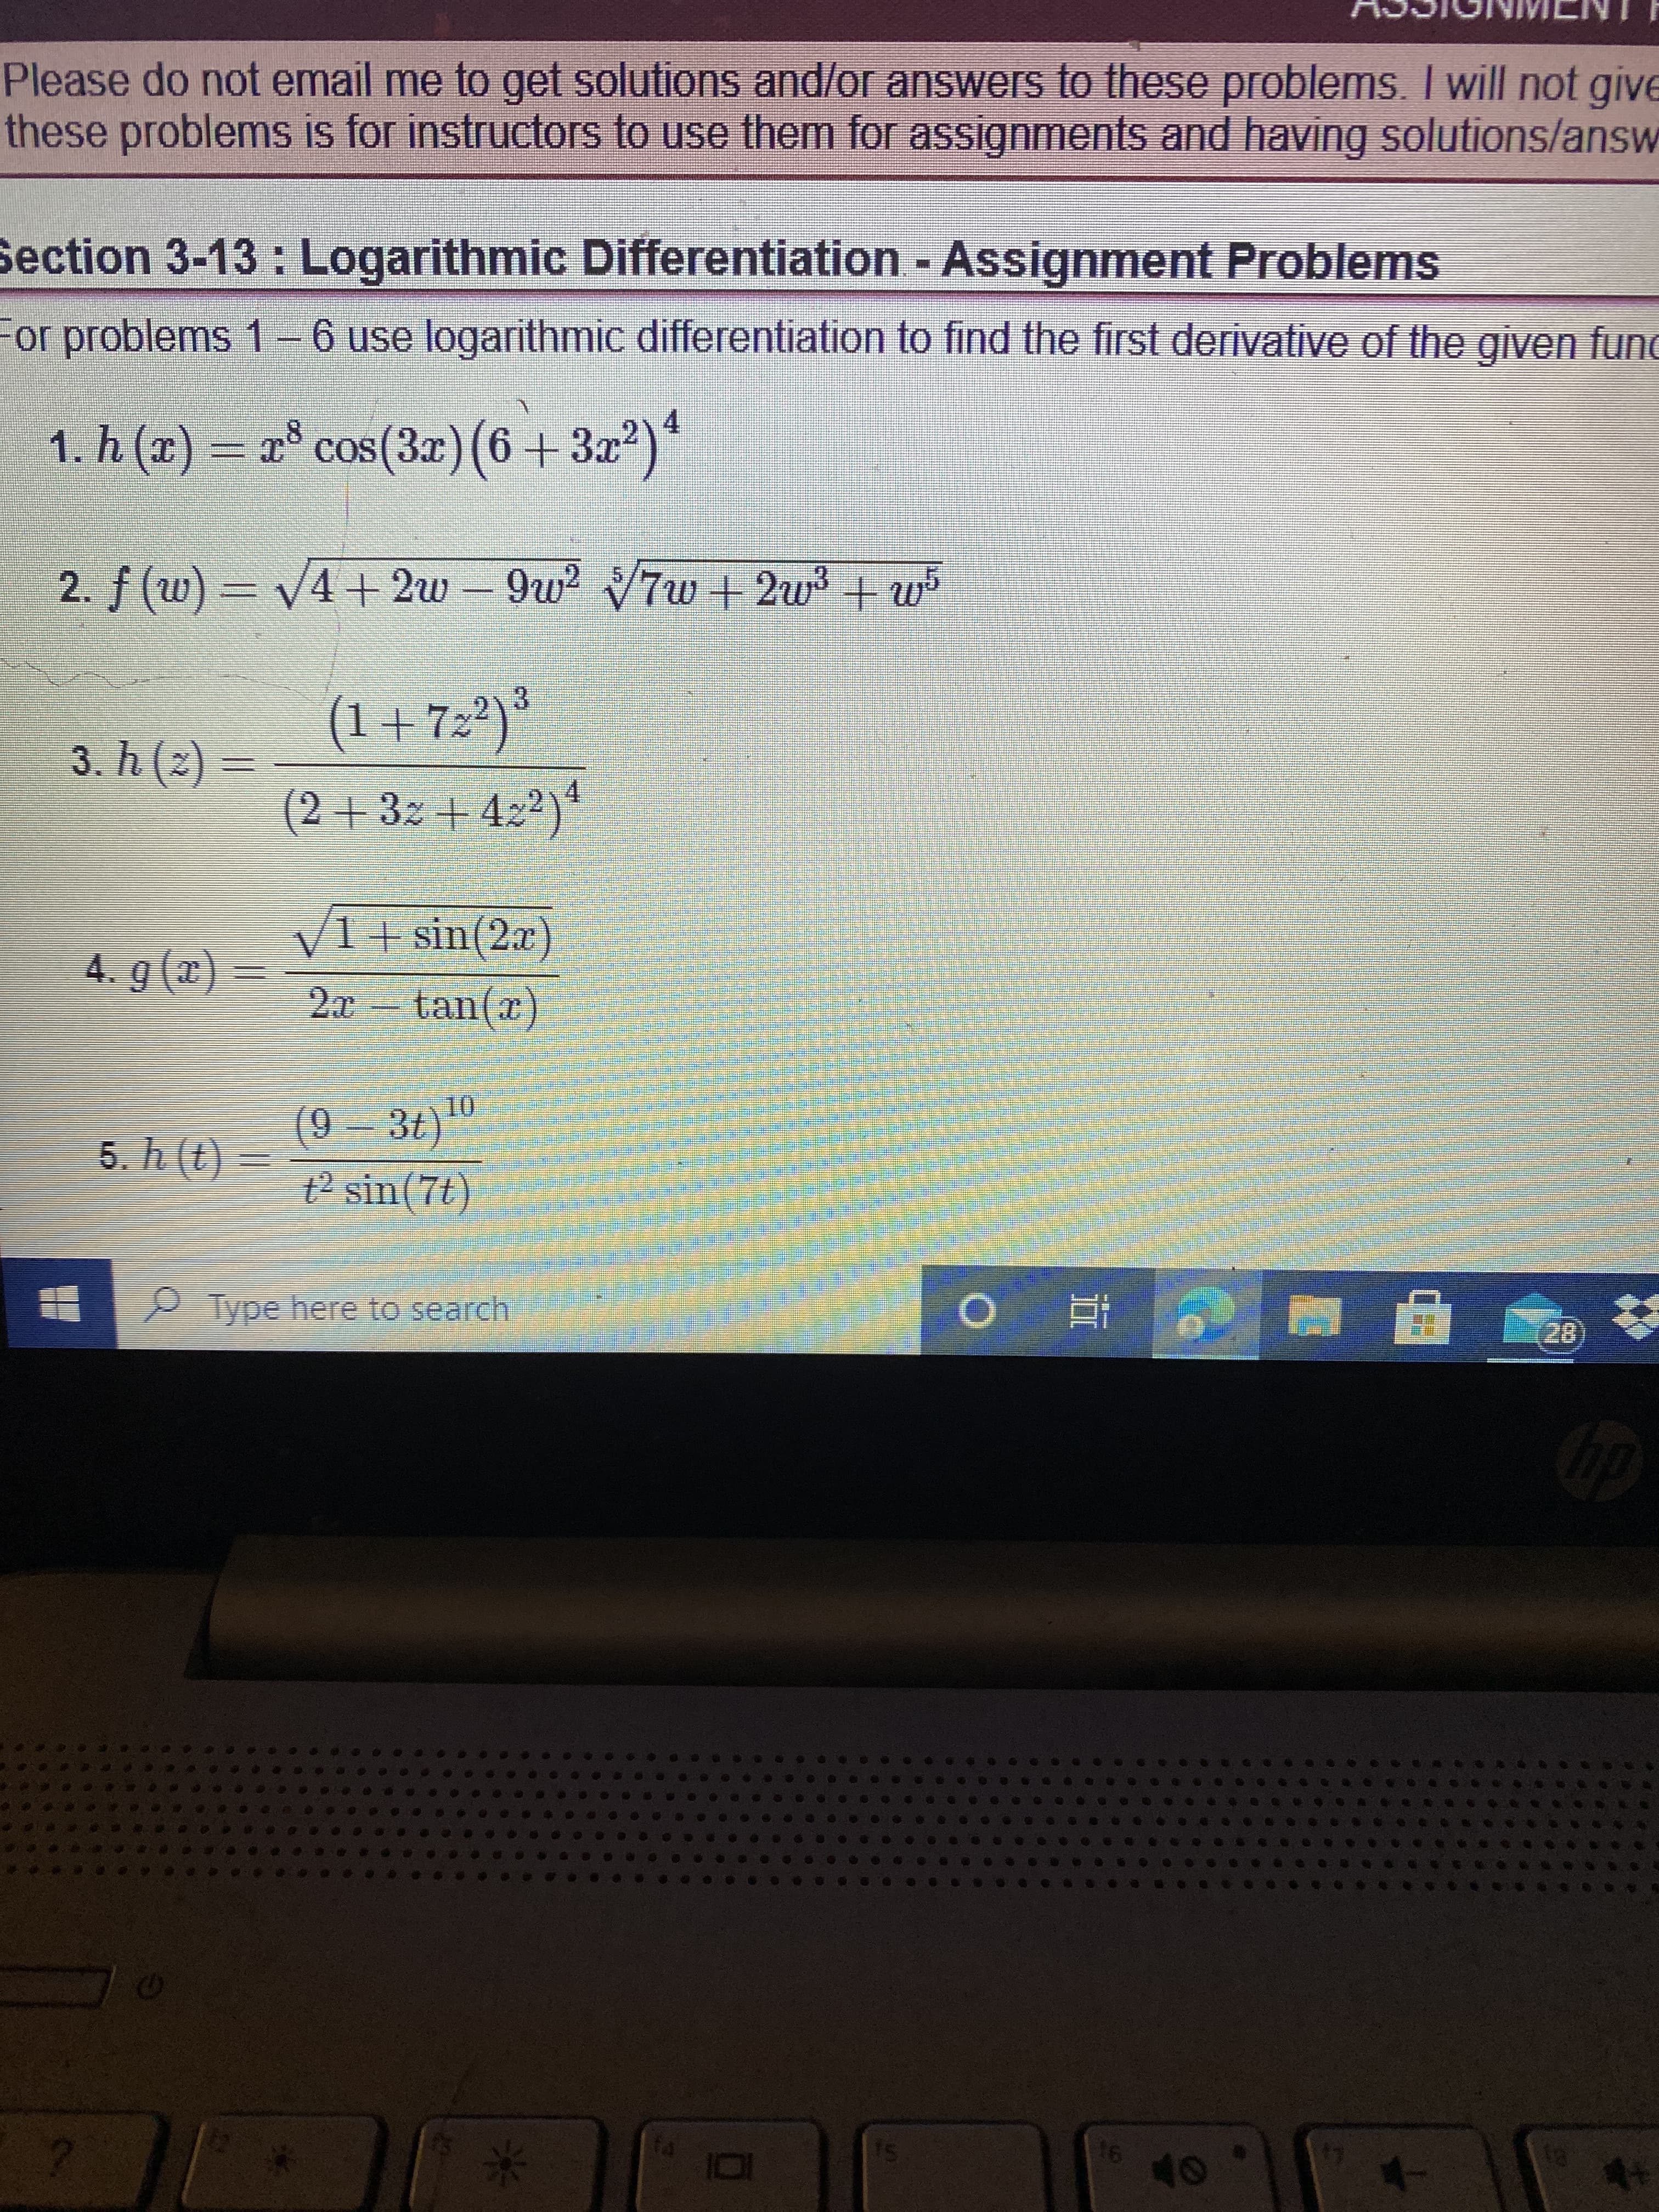 *
Please do not email me to get solutions and/or answers to these problems. I will not give
these problems is for instructors to use them for assignments and having solutions/answ
Section 3-13 : Logarithmic Differentiation - Assignment Problems
For problems 1– 6 use logarithmic differentiation to find the first derivative of the given func
1. h (x) = r° cos(3r) (6+3x?)*
4.
2. f (w) = v4 + 2w – 9w2 7w + 2w3 + w5
(1+72²)*
3.
= (2) 4 `ɛ
(2+ 32 + 422)*
4.
V1+ sin(2x)
= (x) 6
tan(x)
(9-3t)0
(7)
t2 sin(7t)
5. h (t)
10L
= (?) 4 '9
Type here to search
直
会
2)
91
